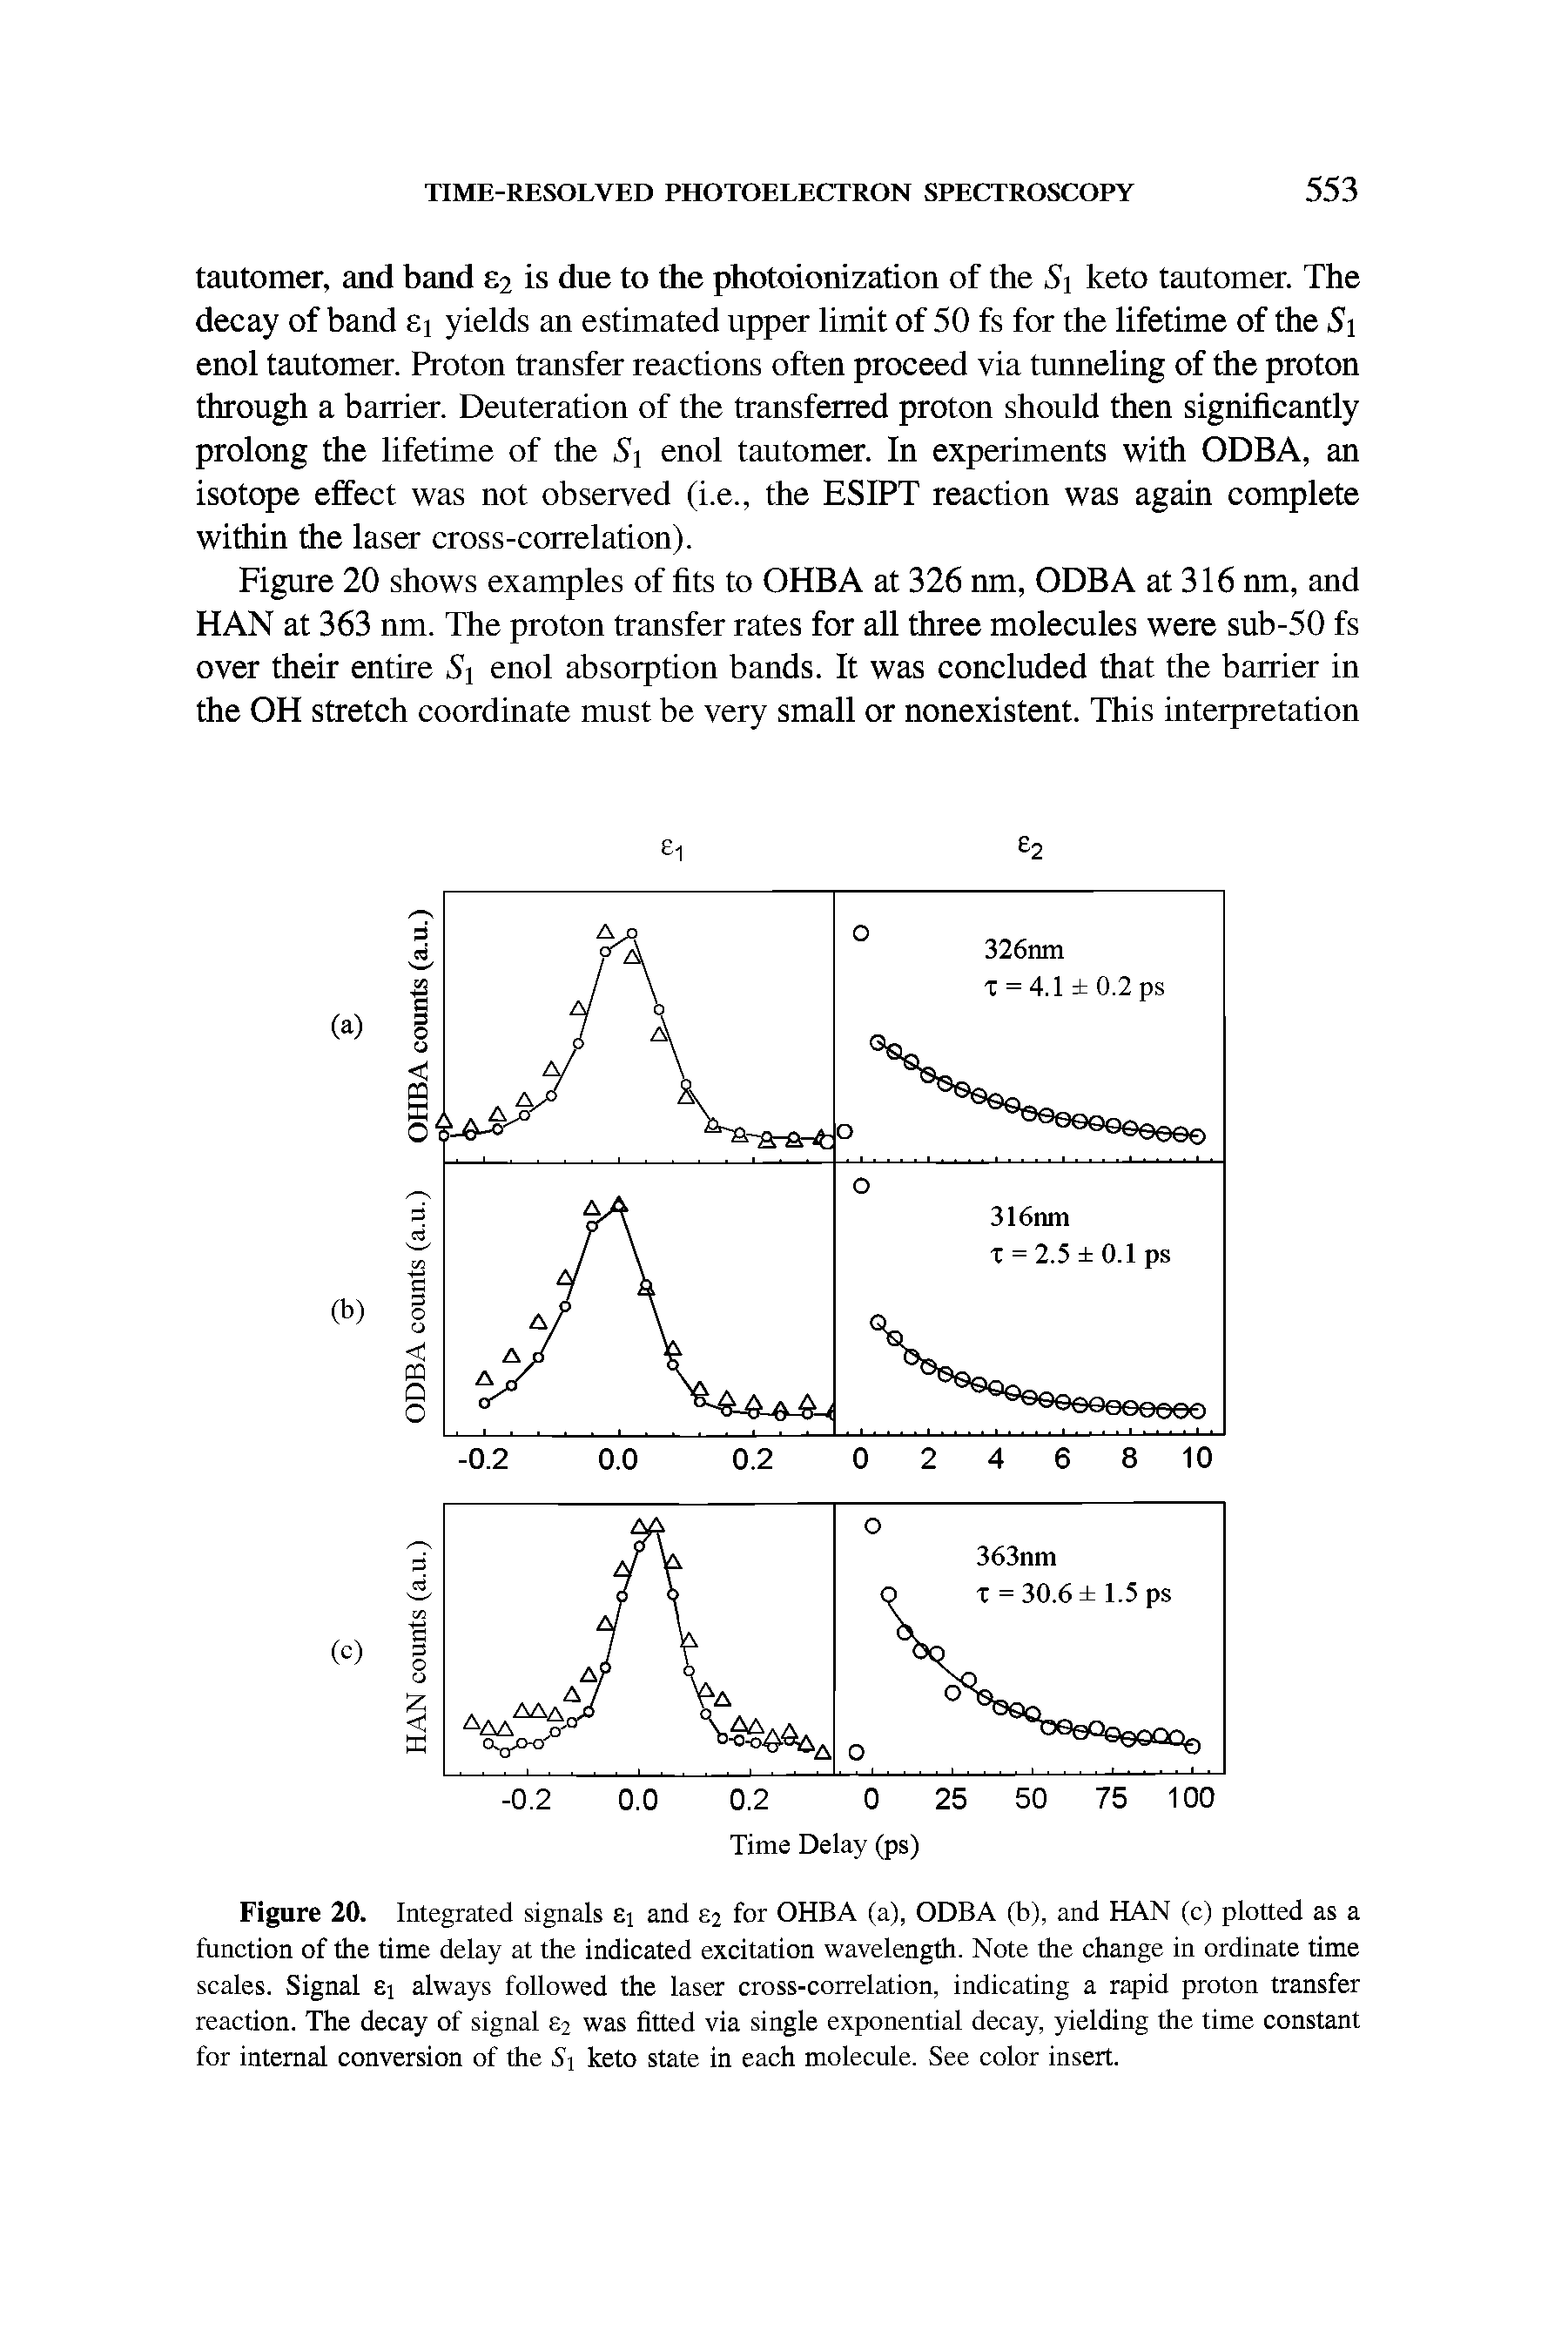 Figure 20. Integrated signals Ei and 2 for OHBA (a), ODBA (b), and HAN (c) plotted as a function of the time delay at the indicated excitation wavelength. Note the change in ordinate time scales. Signal Ei always followed the laser cross-correlation, indicating a rapid proton transfer reaction. The decay of signal 2 was fitted via single exponential decay, yielding the time constant for internal conversion of the Si keto state in each molecule. See color insert.